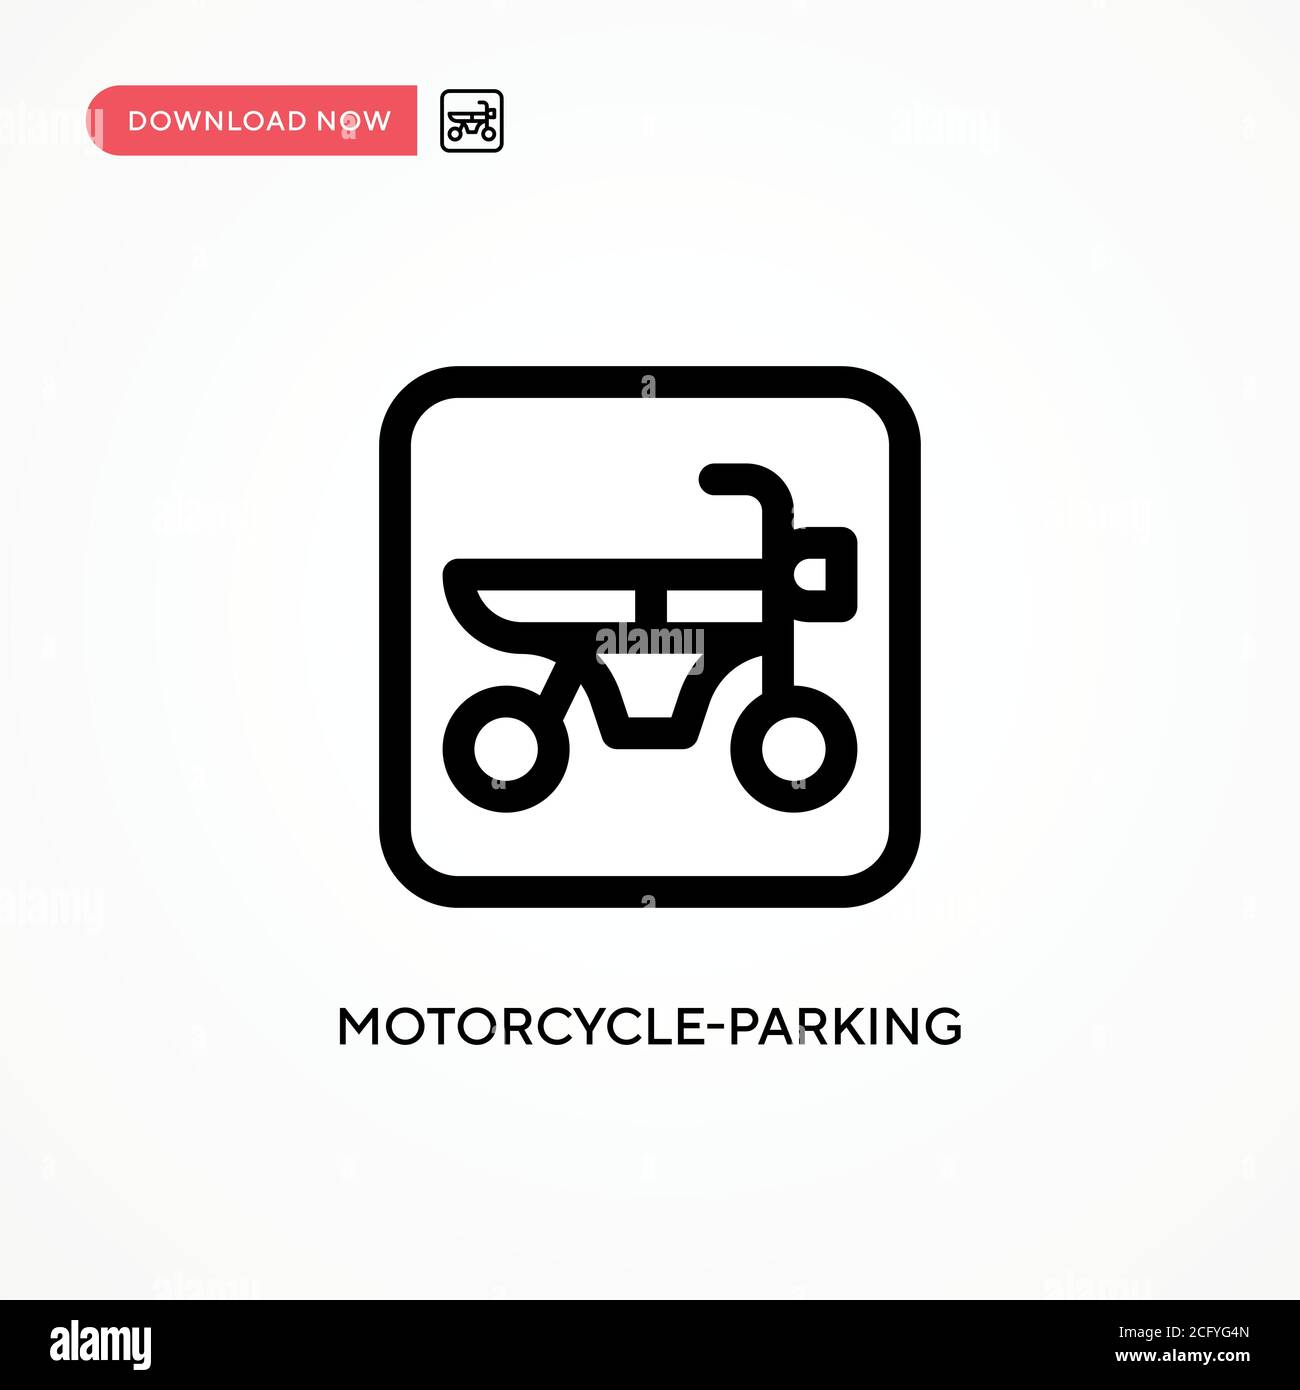 Motorcycle-parking Simple vector icon. Modern, simple flat vector illustration for web site or mobile app Stock Vector